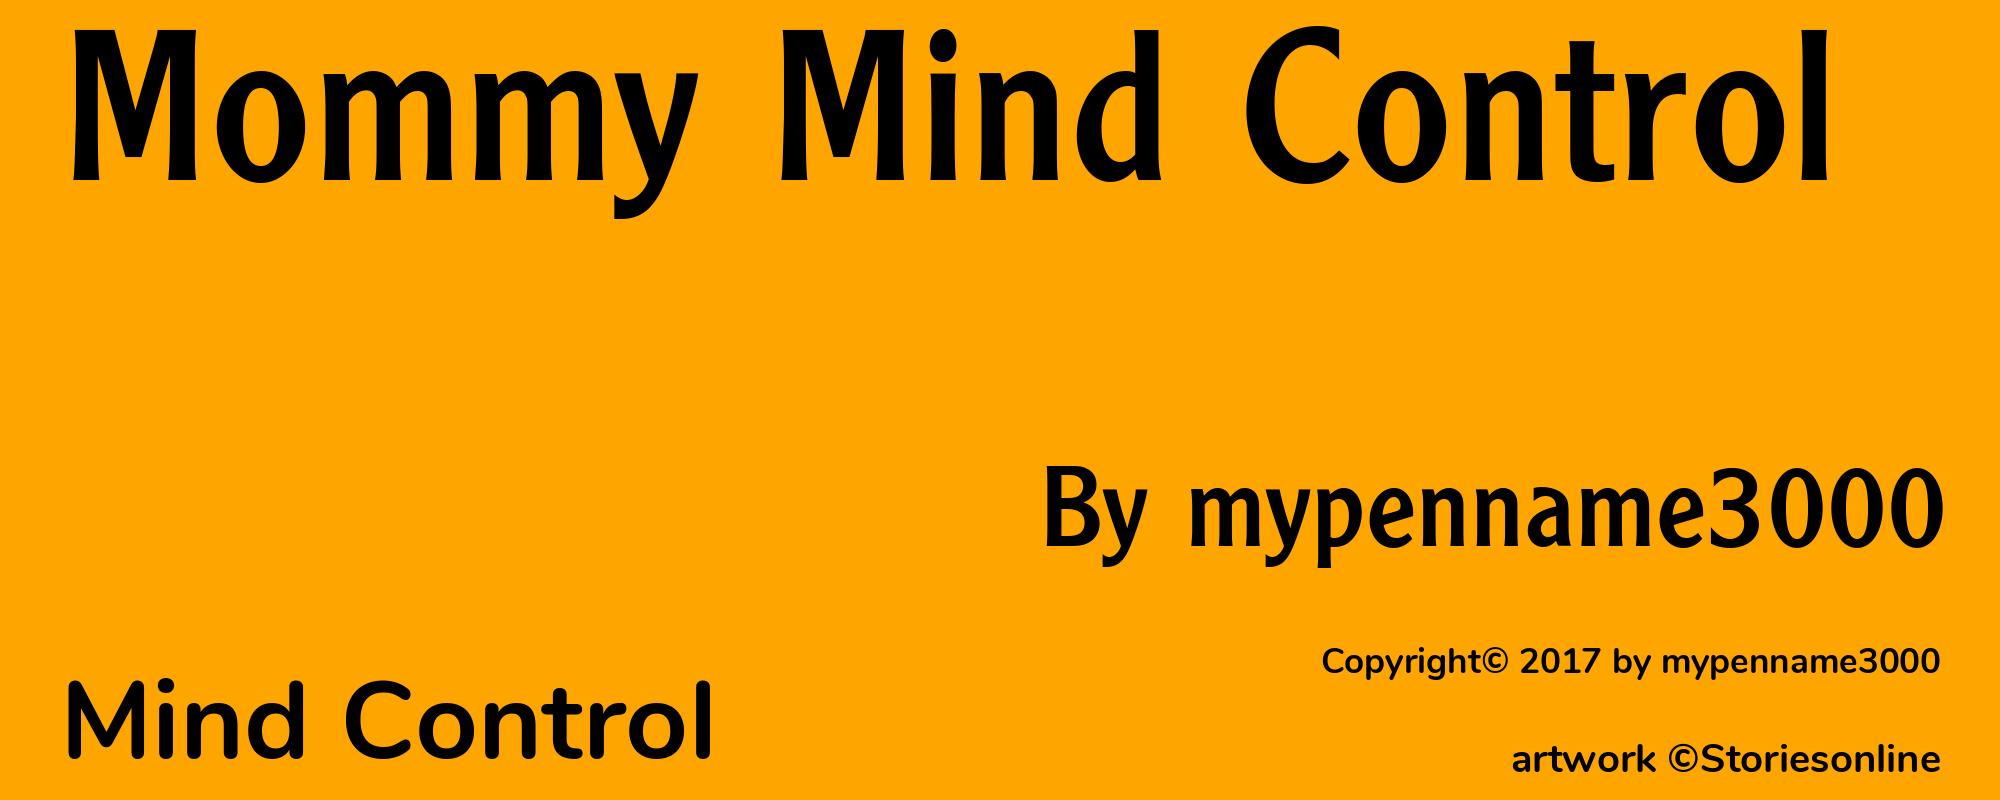 Mommy Mind Control - Cover